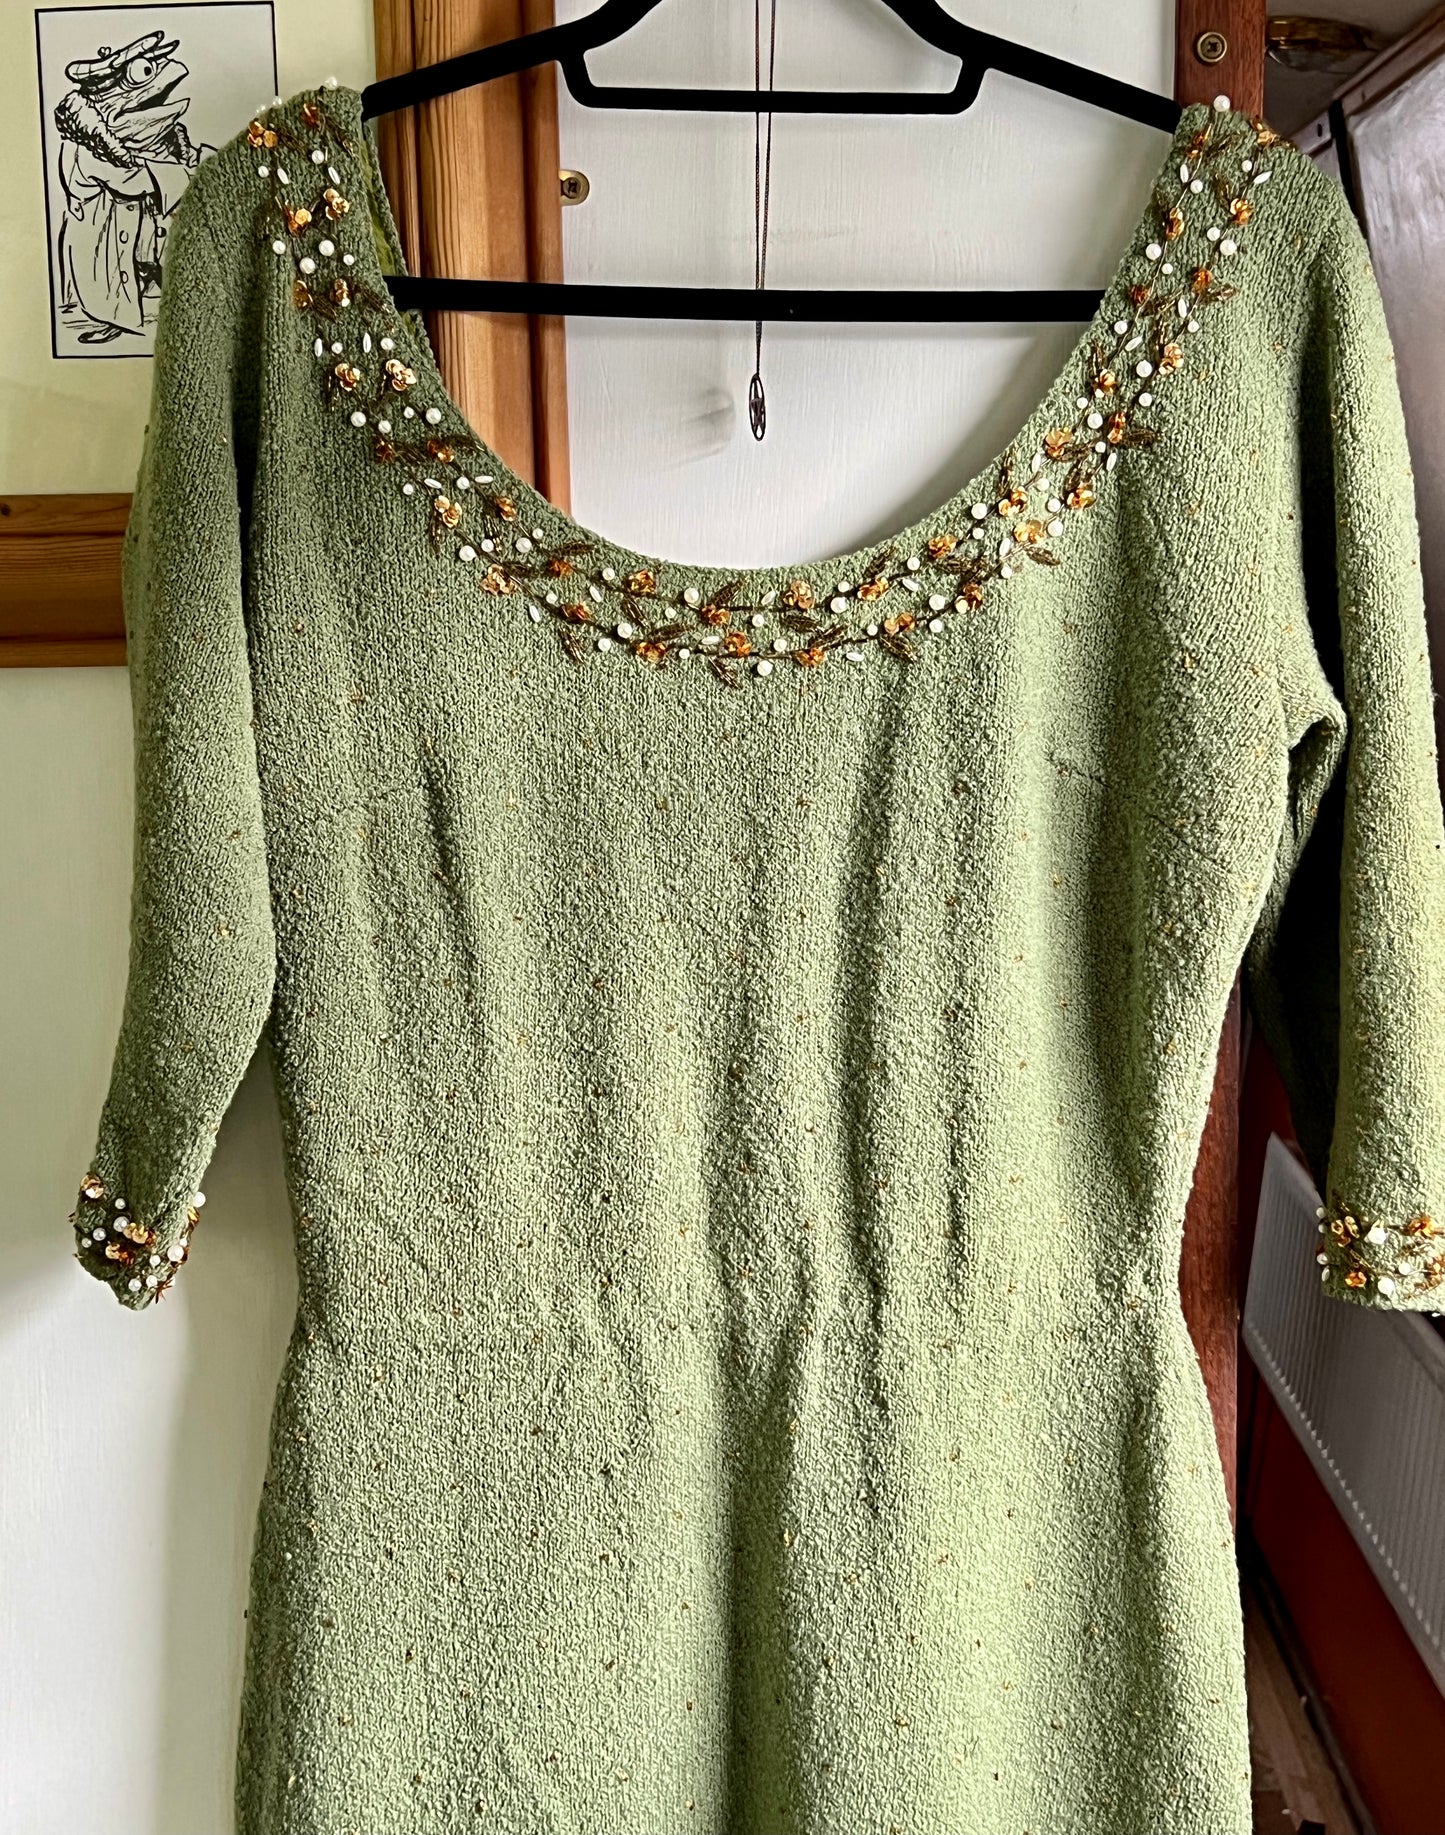 Vintage 1950s 1960s Gene Shelly green wool dress with gold sequins and beads and pearls Rare XXL plus size